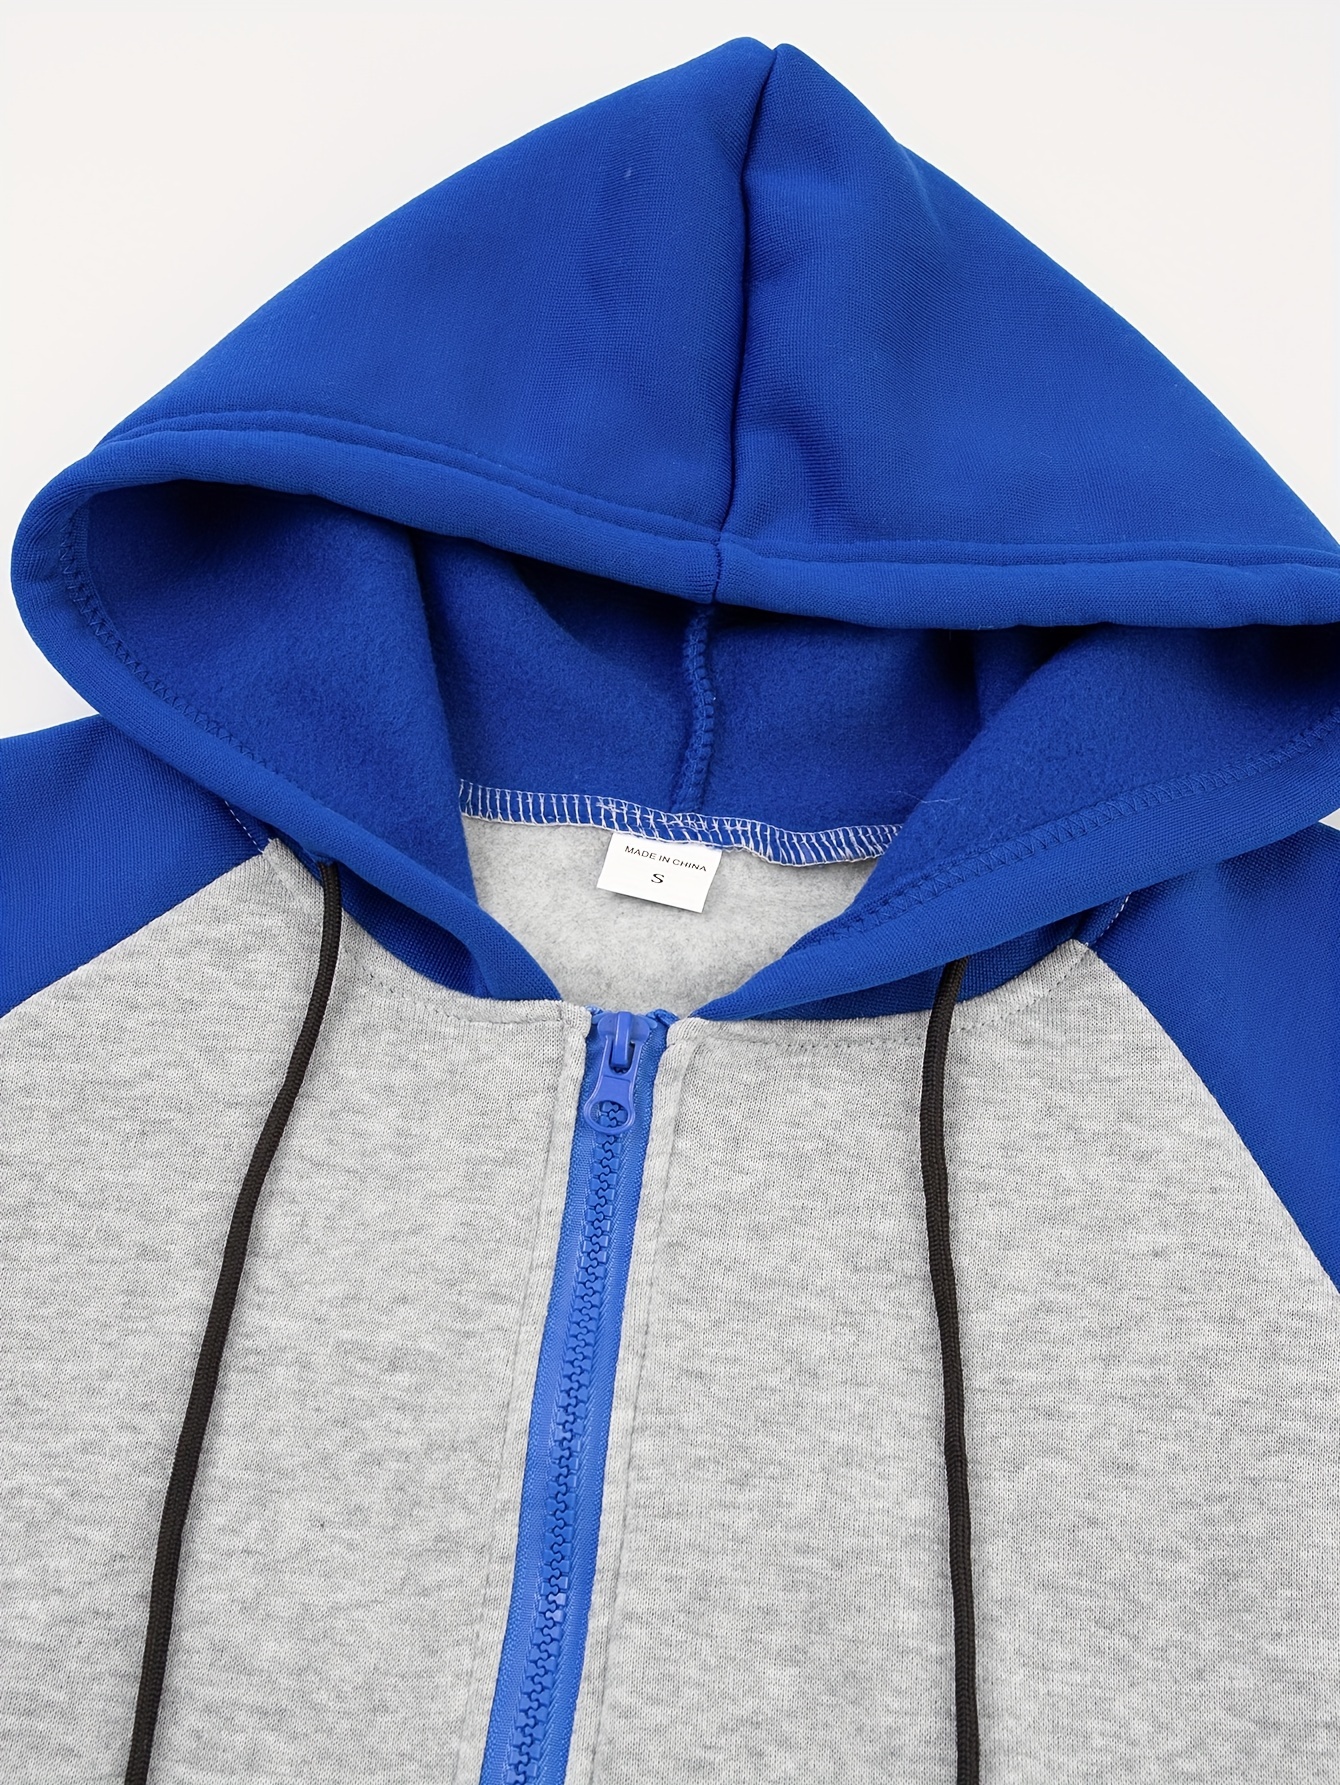 spring and autumn mens color block drawstring hooded long sleeve zip up jacket with pockets workout training details 12